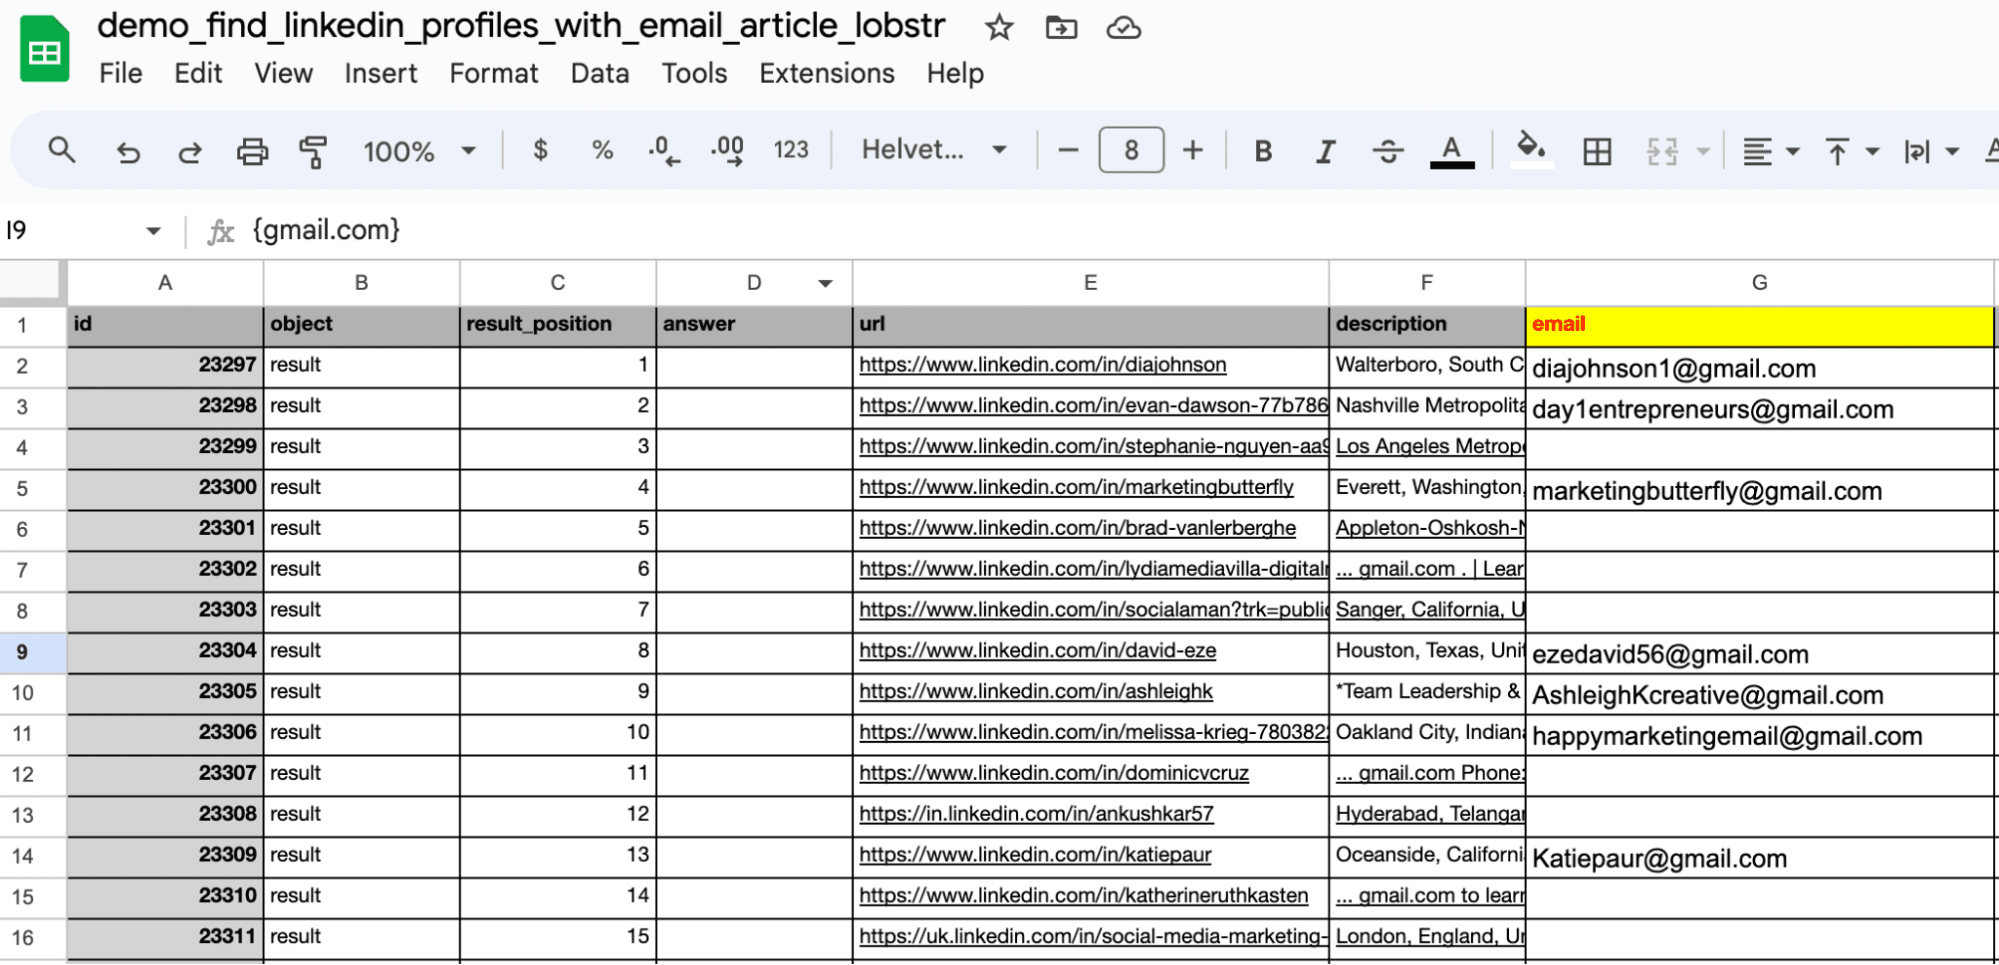 linkedin profiles with emails export googlesheet - image22.png